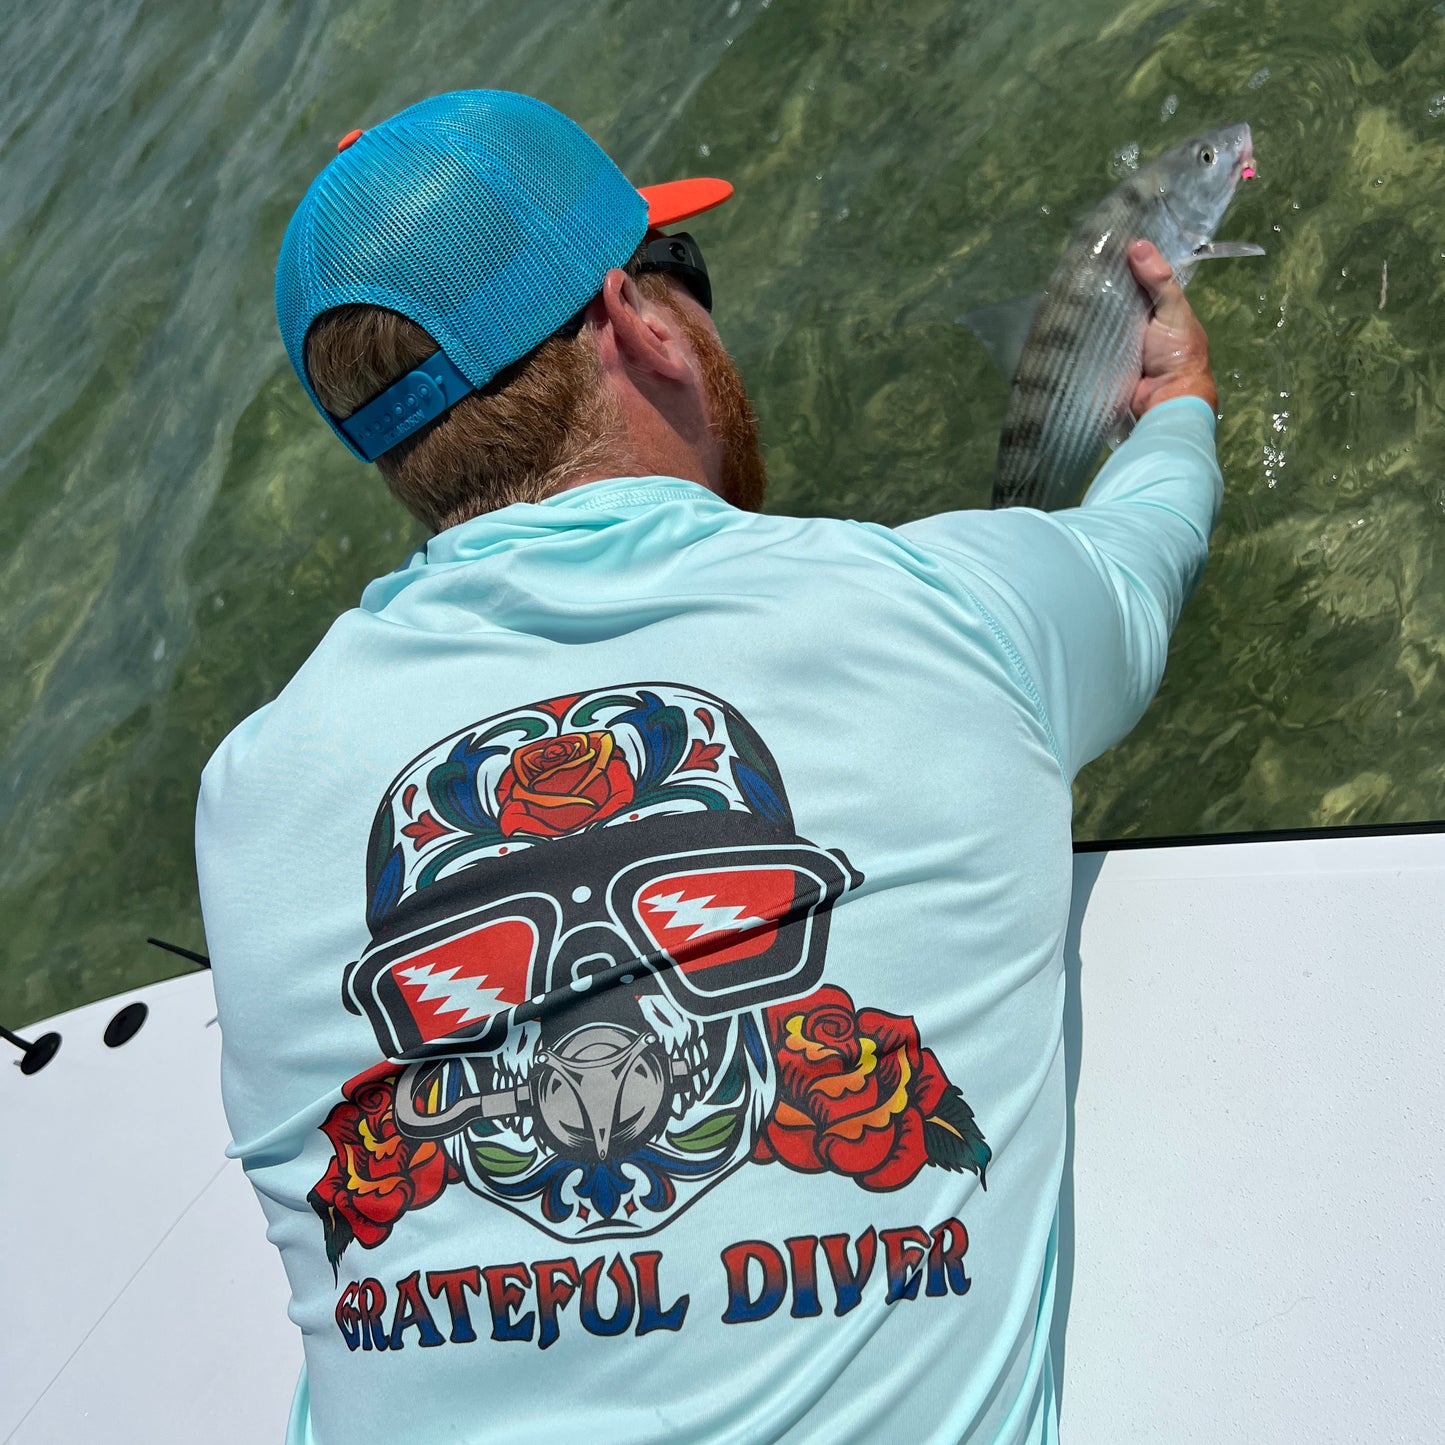 Grateful Diver Sugar Skull UV Shirt Hoodie in arctic blue on model showing back while holding a fish off the side of a boat